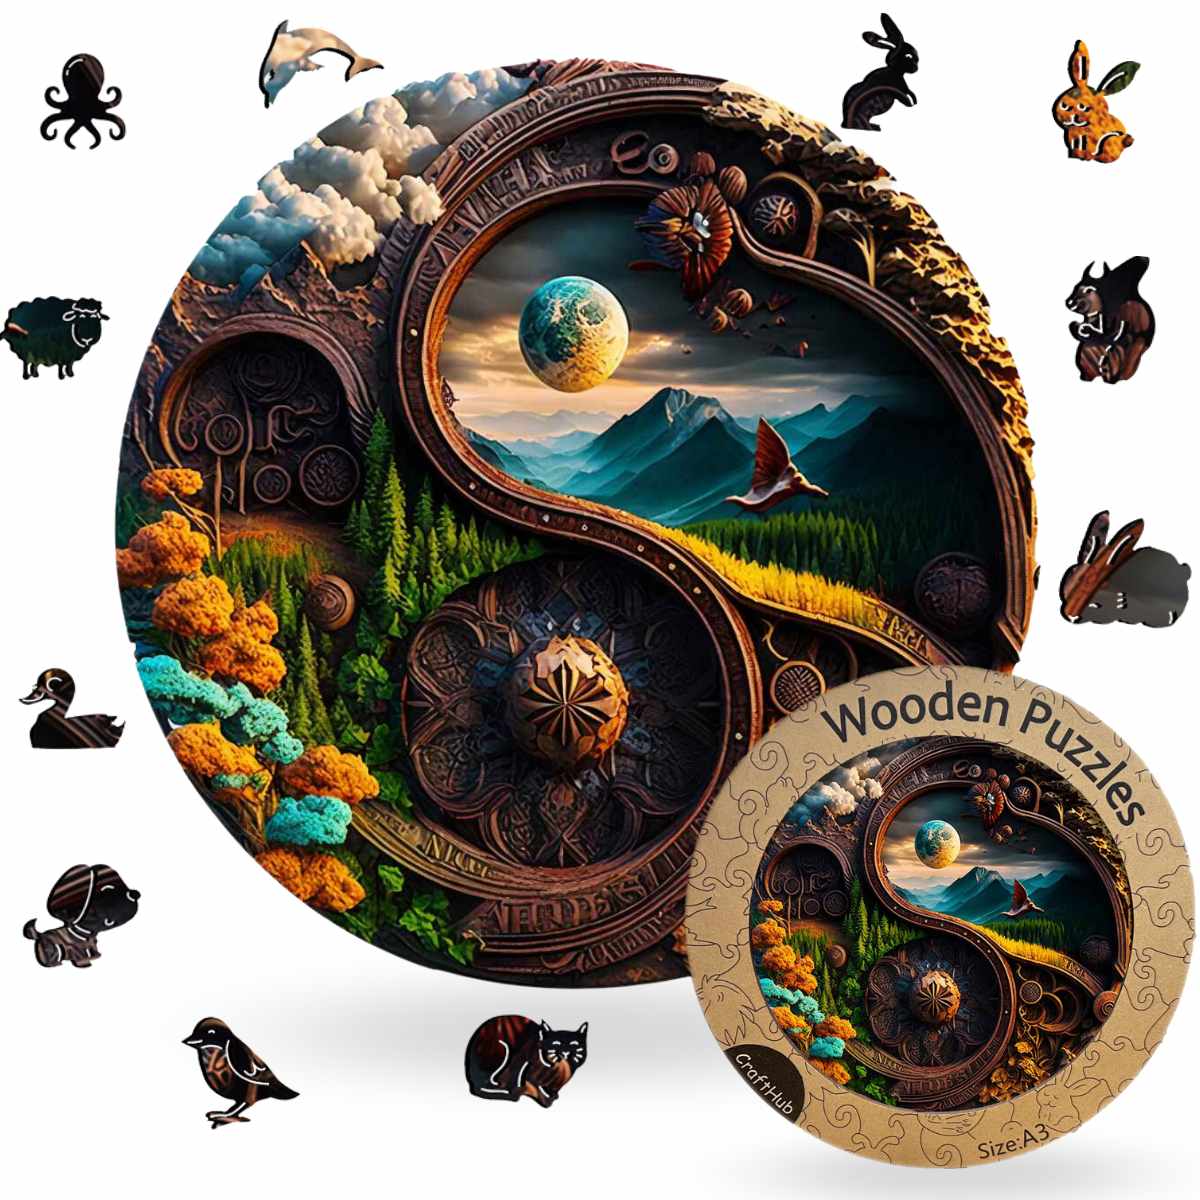 Animal Jigsaw Puzzle > Wooden Jigsaw Puzzle > Jigsaw Puzzle A3+Wooden Box Heaven Yin Yang - Jigsaw Puzzle